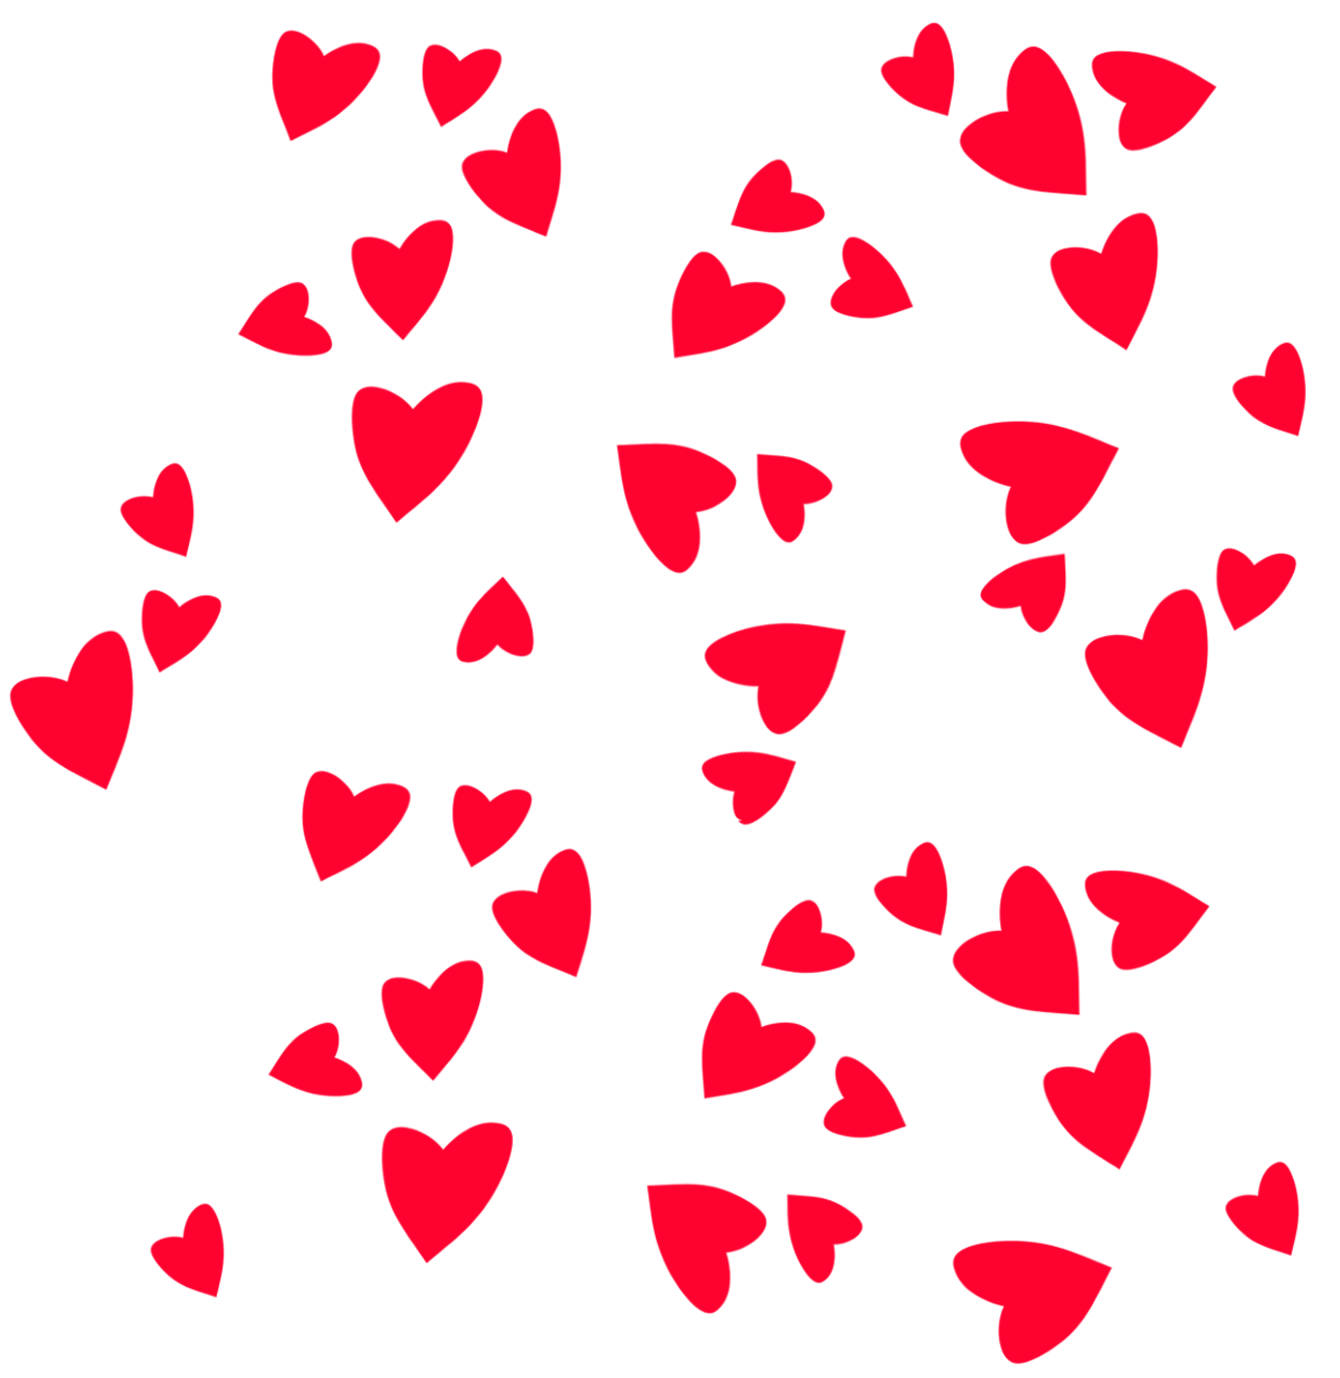 Valentines Day Background Png High Quality Image - Valentines, Transparent background PNG HD thumbnail